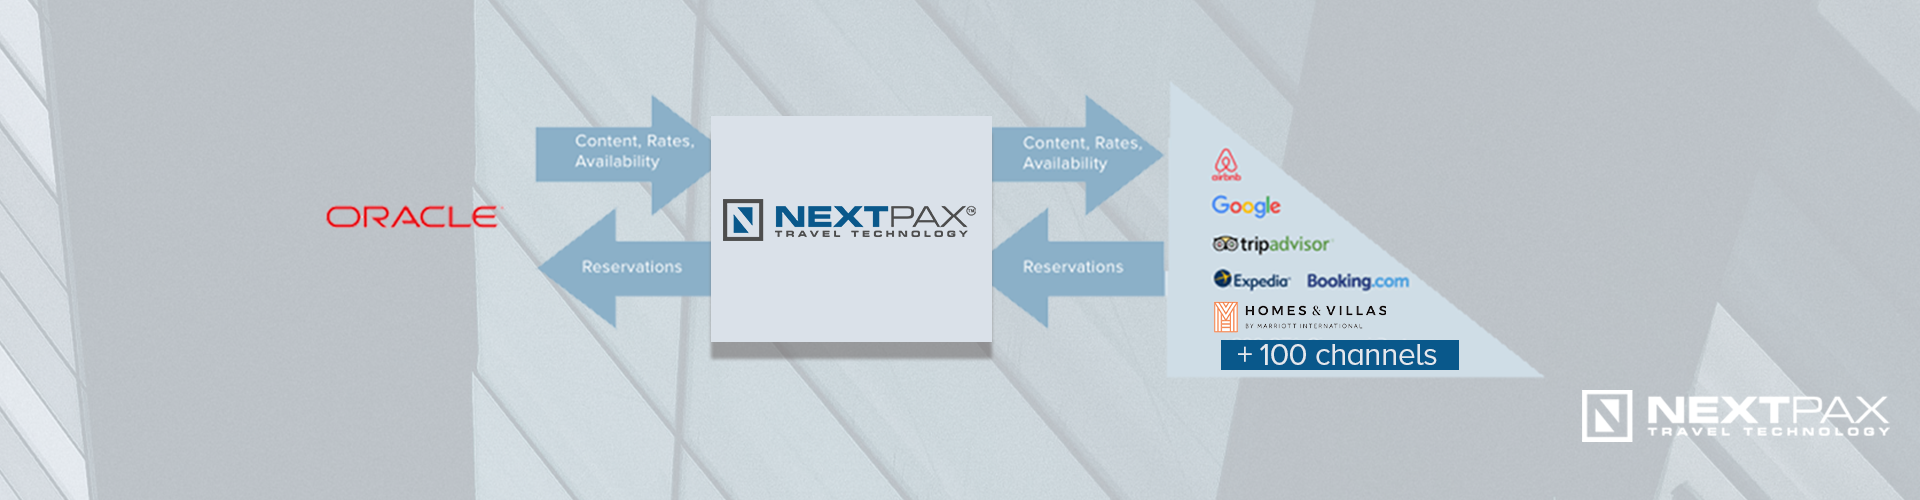 Oracle Hospitality and NextPax Travel Technology Integration